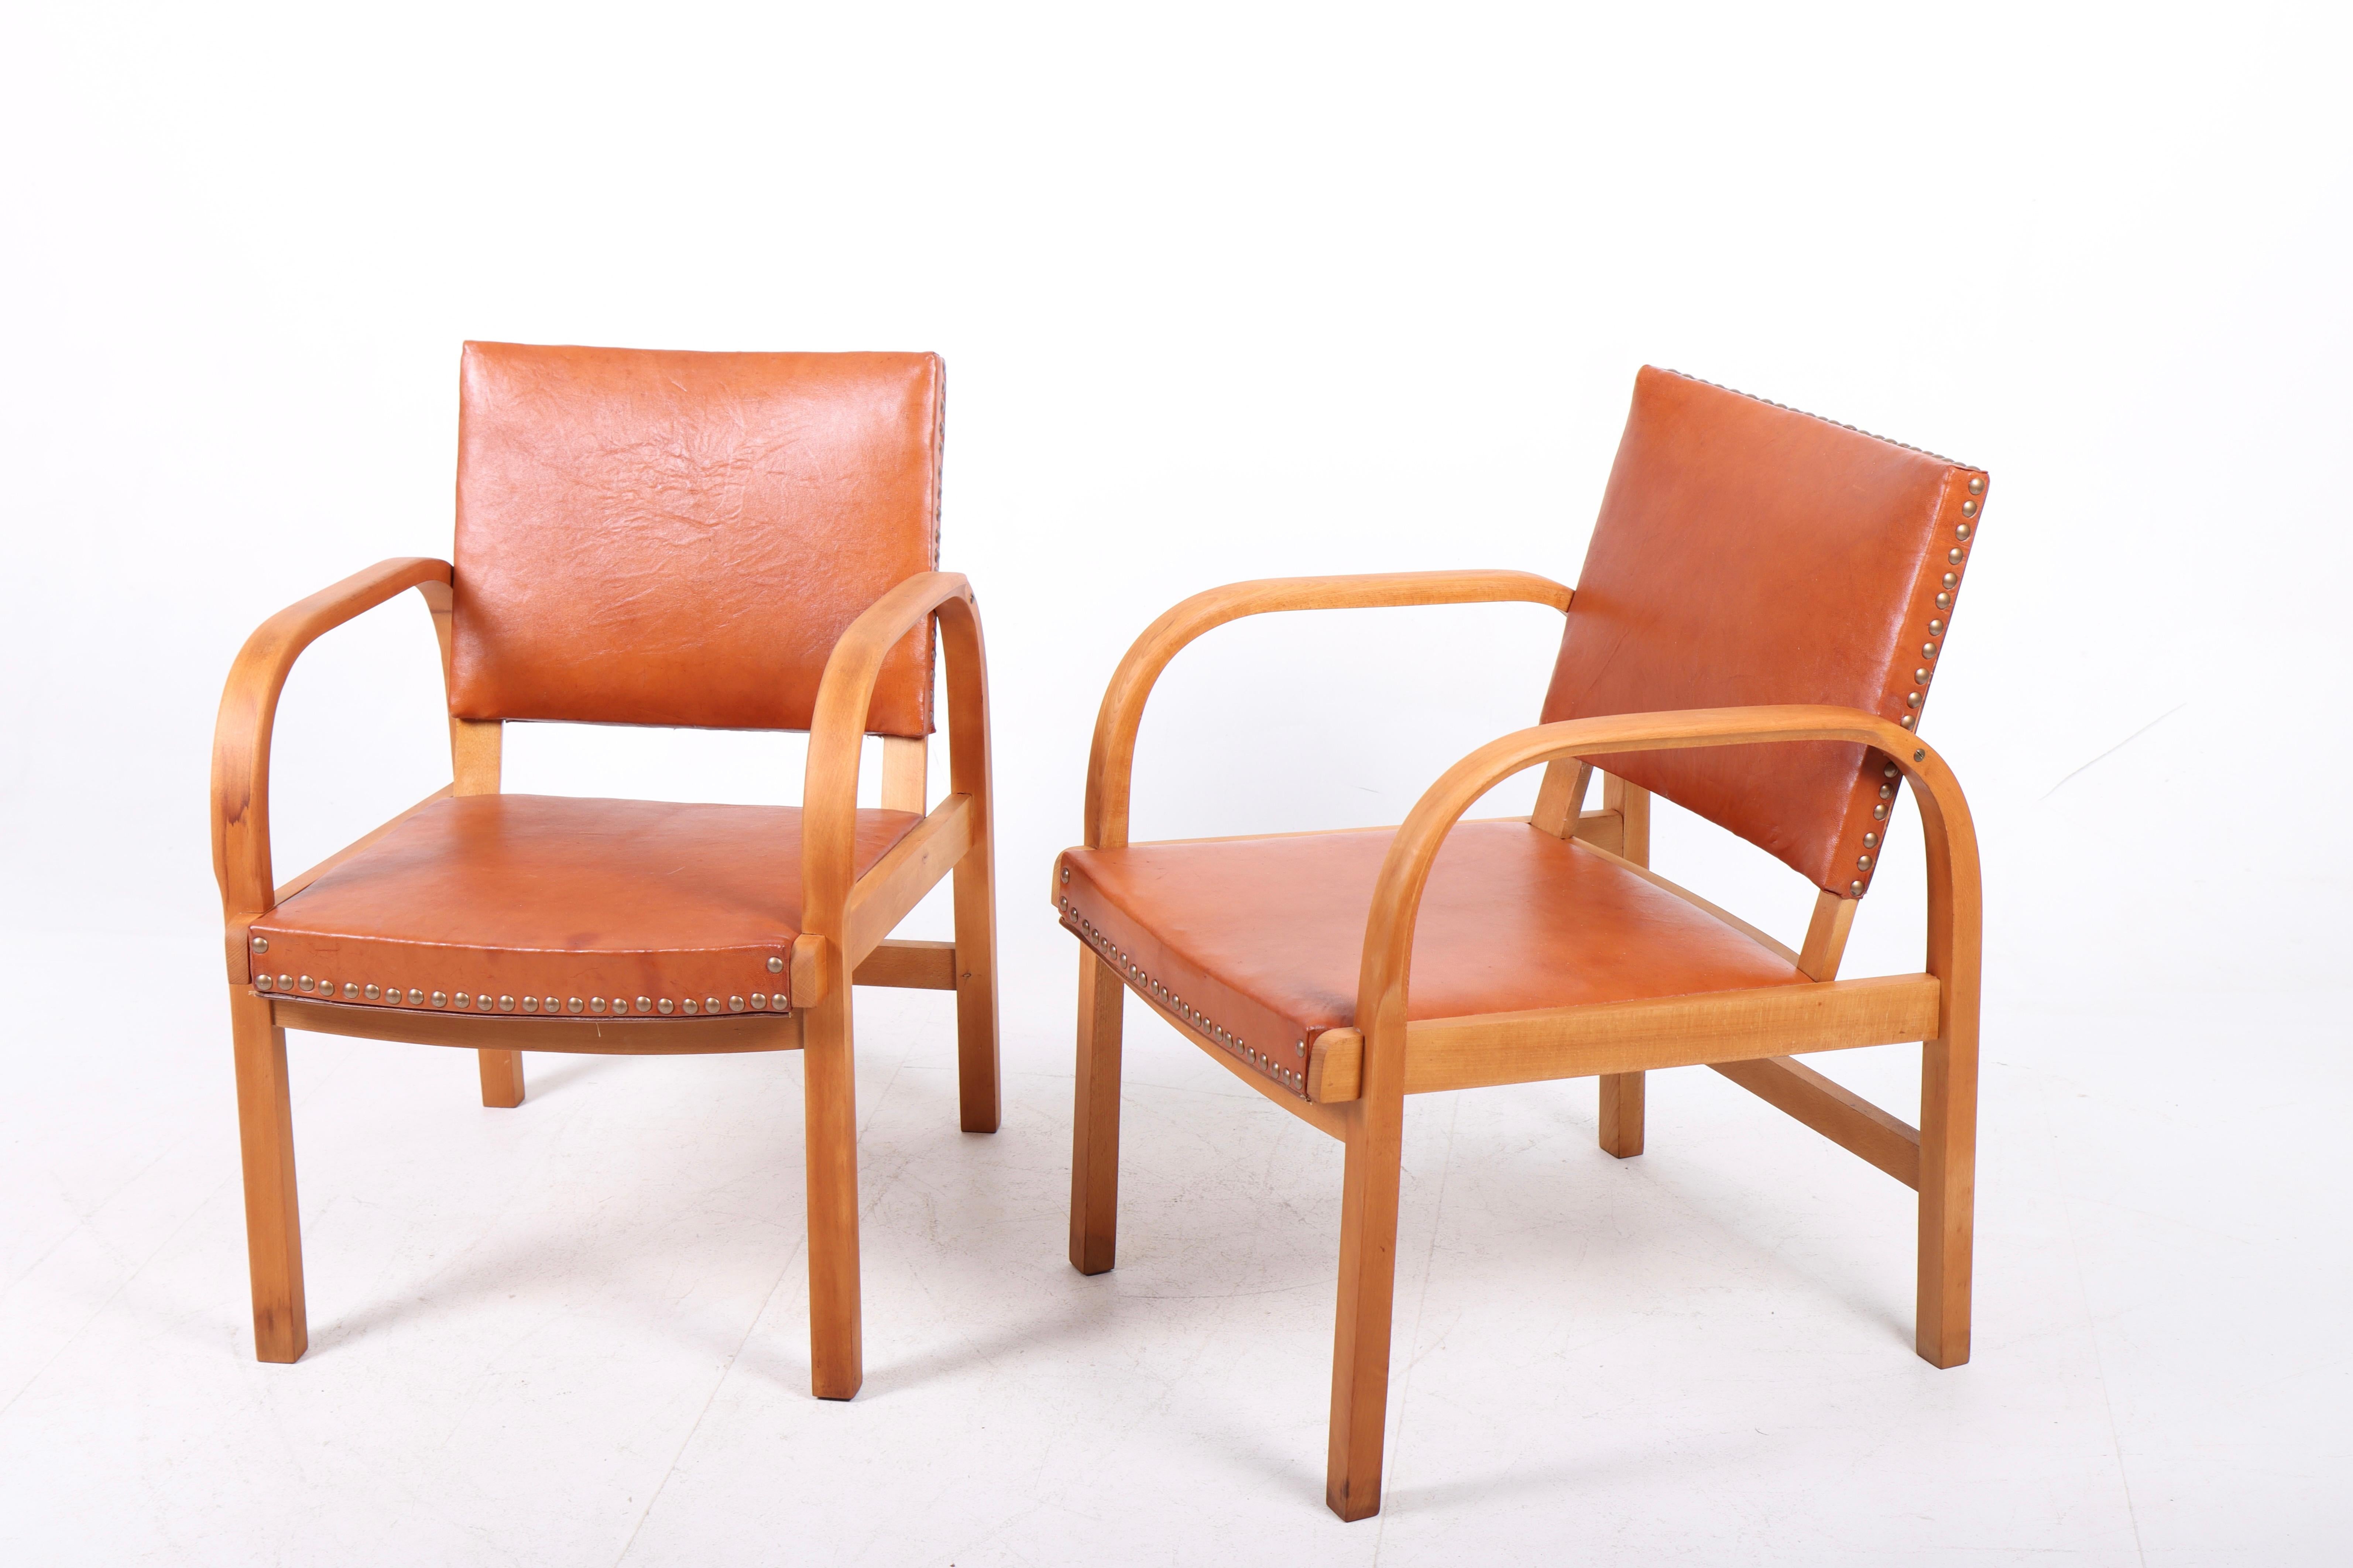 Pair of lounge chairs in beech and leather, designed by Magnus L. Stephensen and made by Danish cabinetmaker Fritz Hansen in the 1940s.